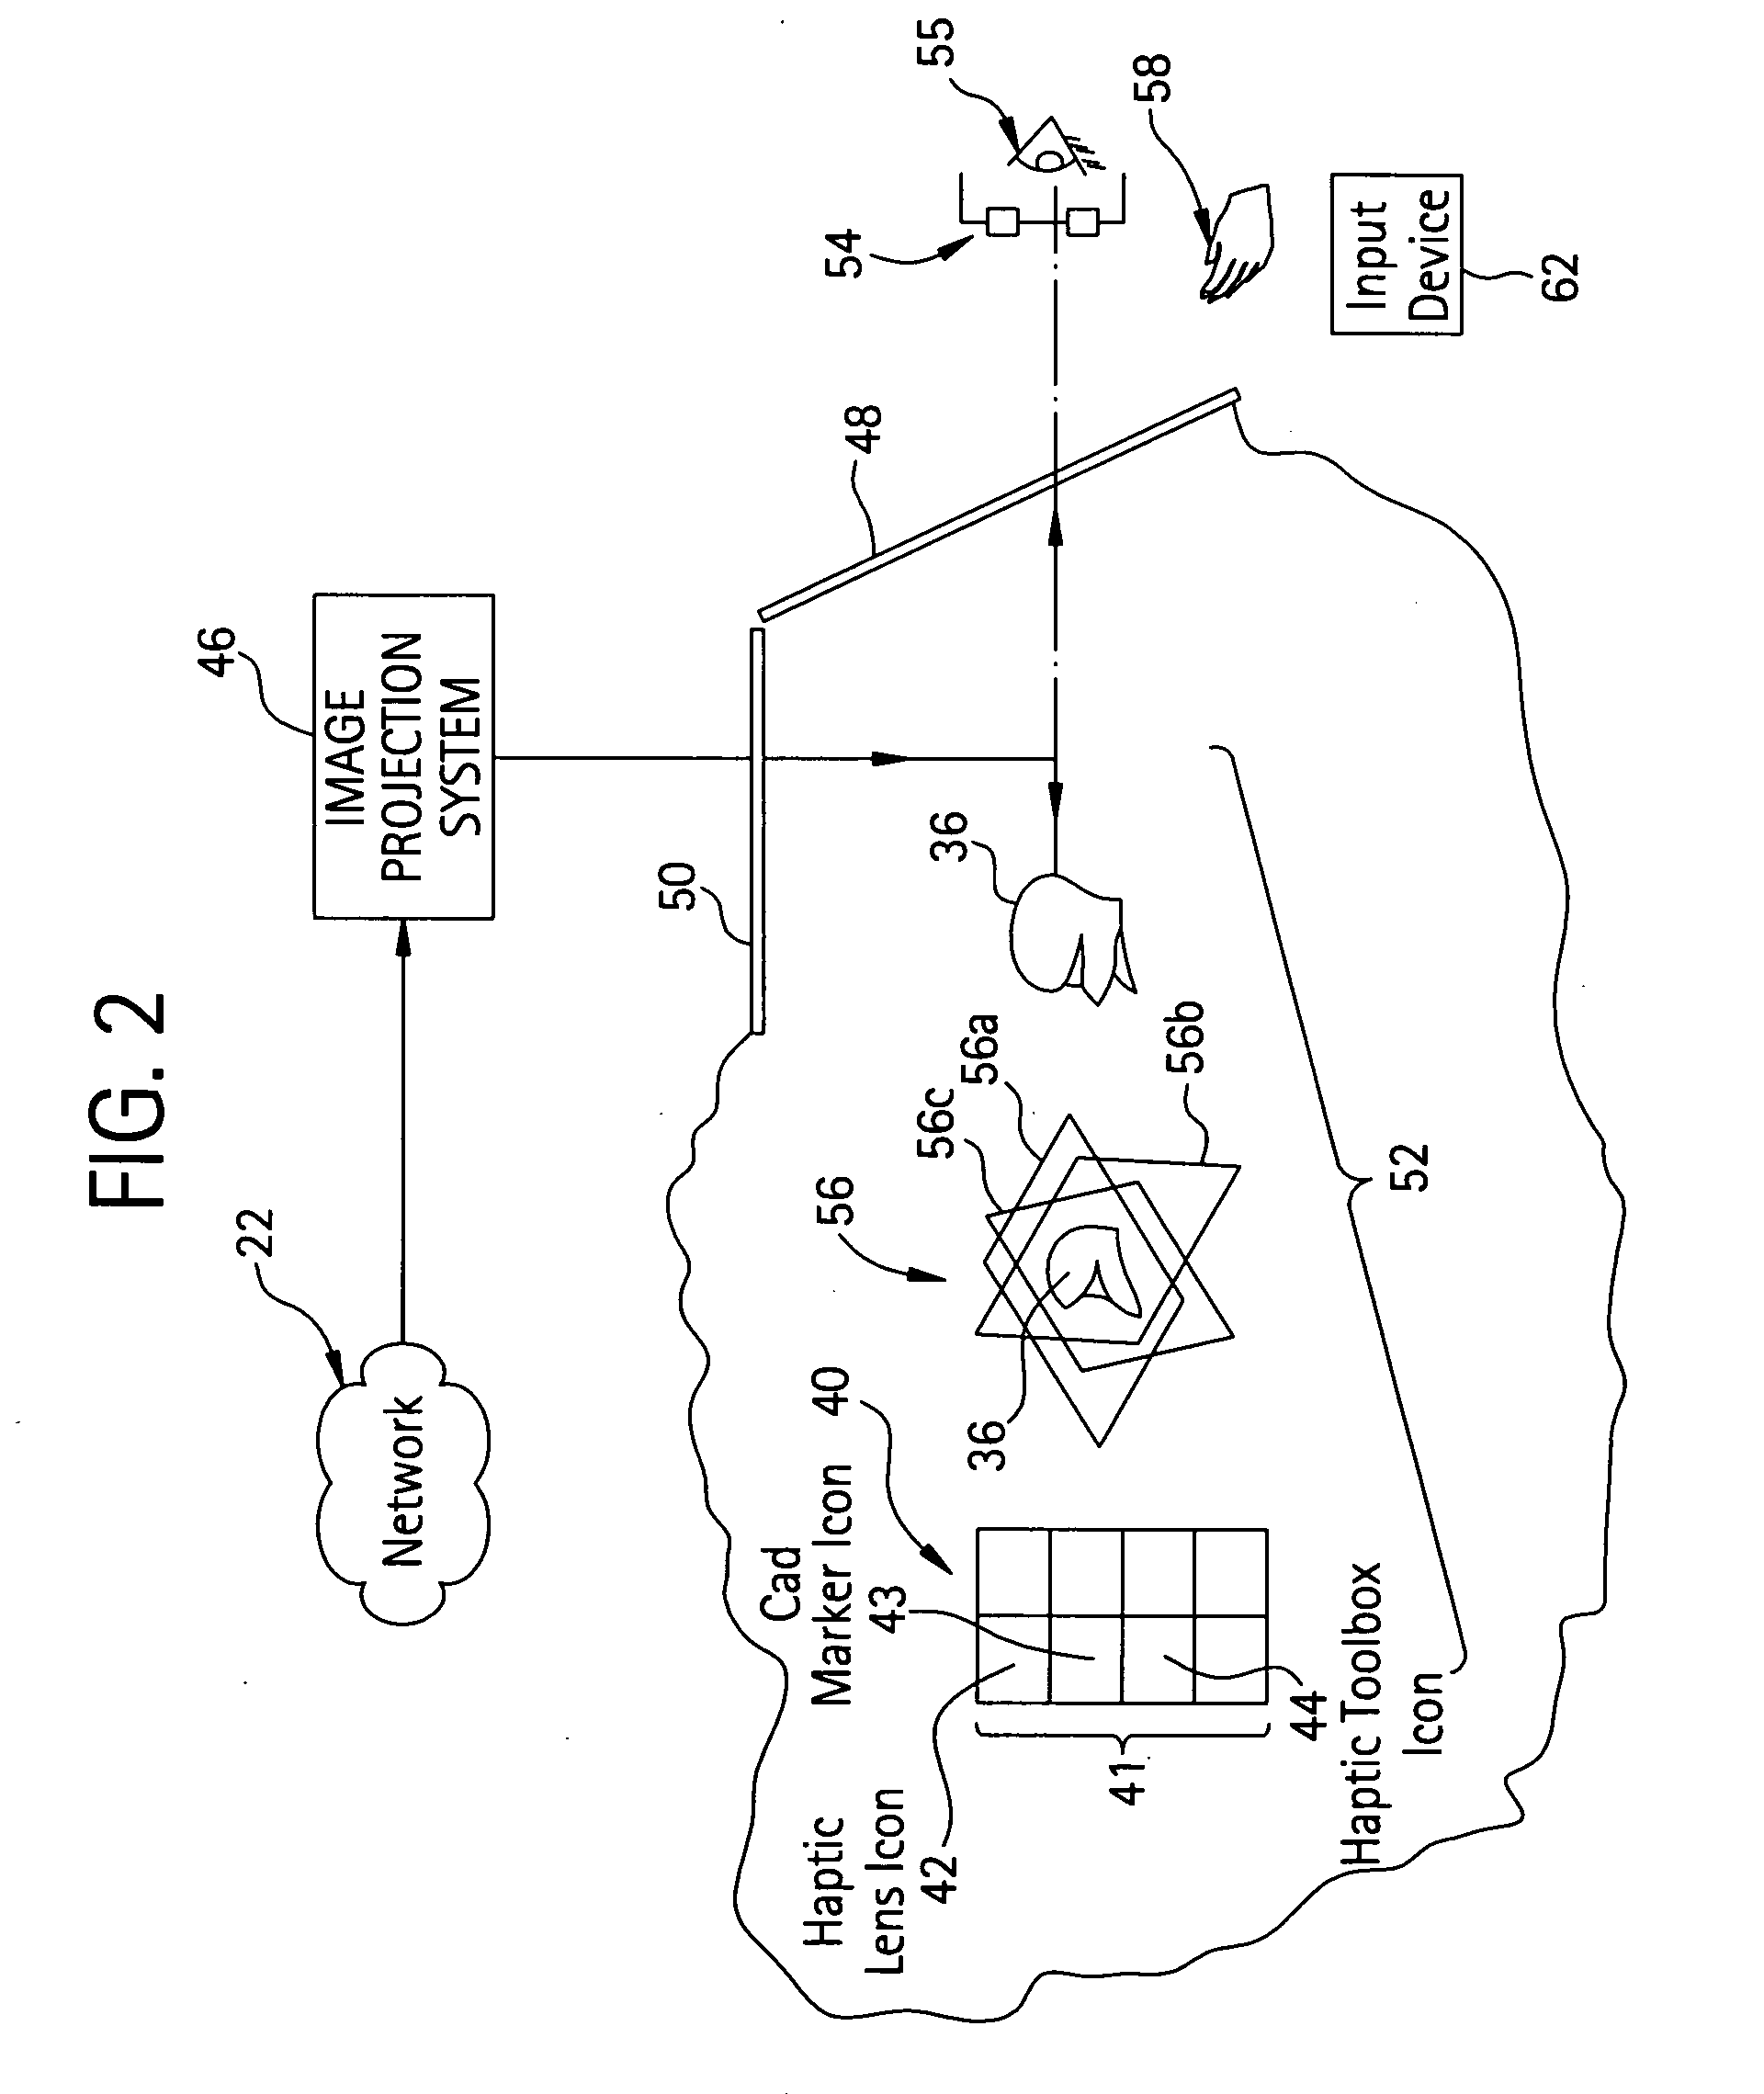 3D display system and method